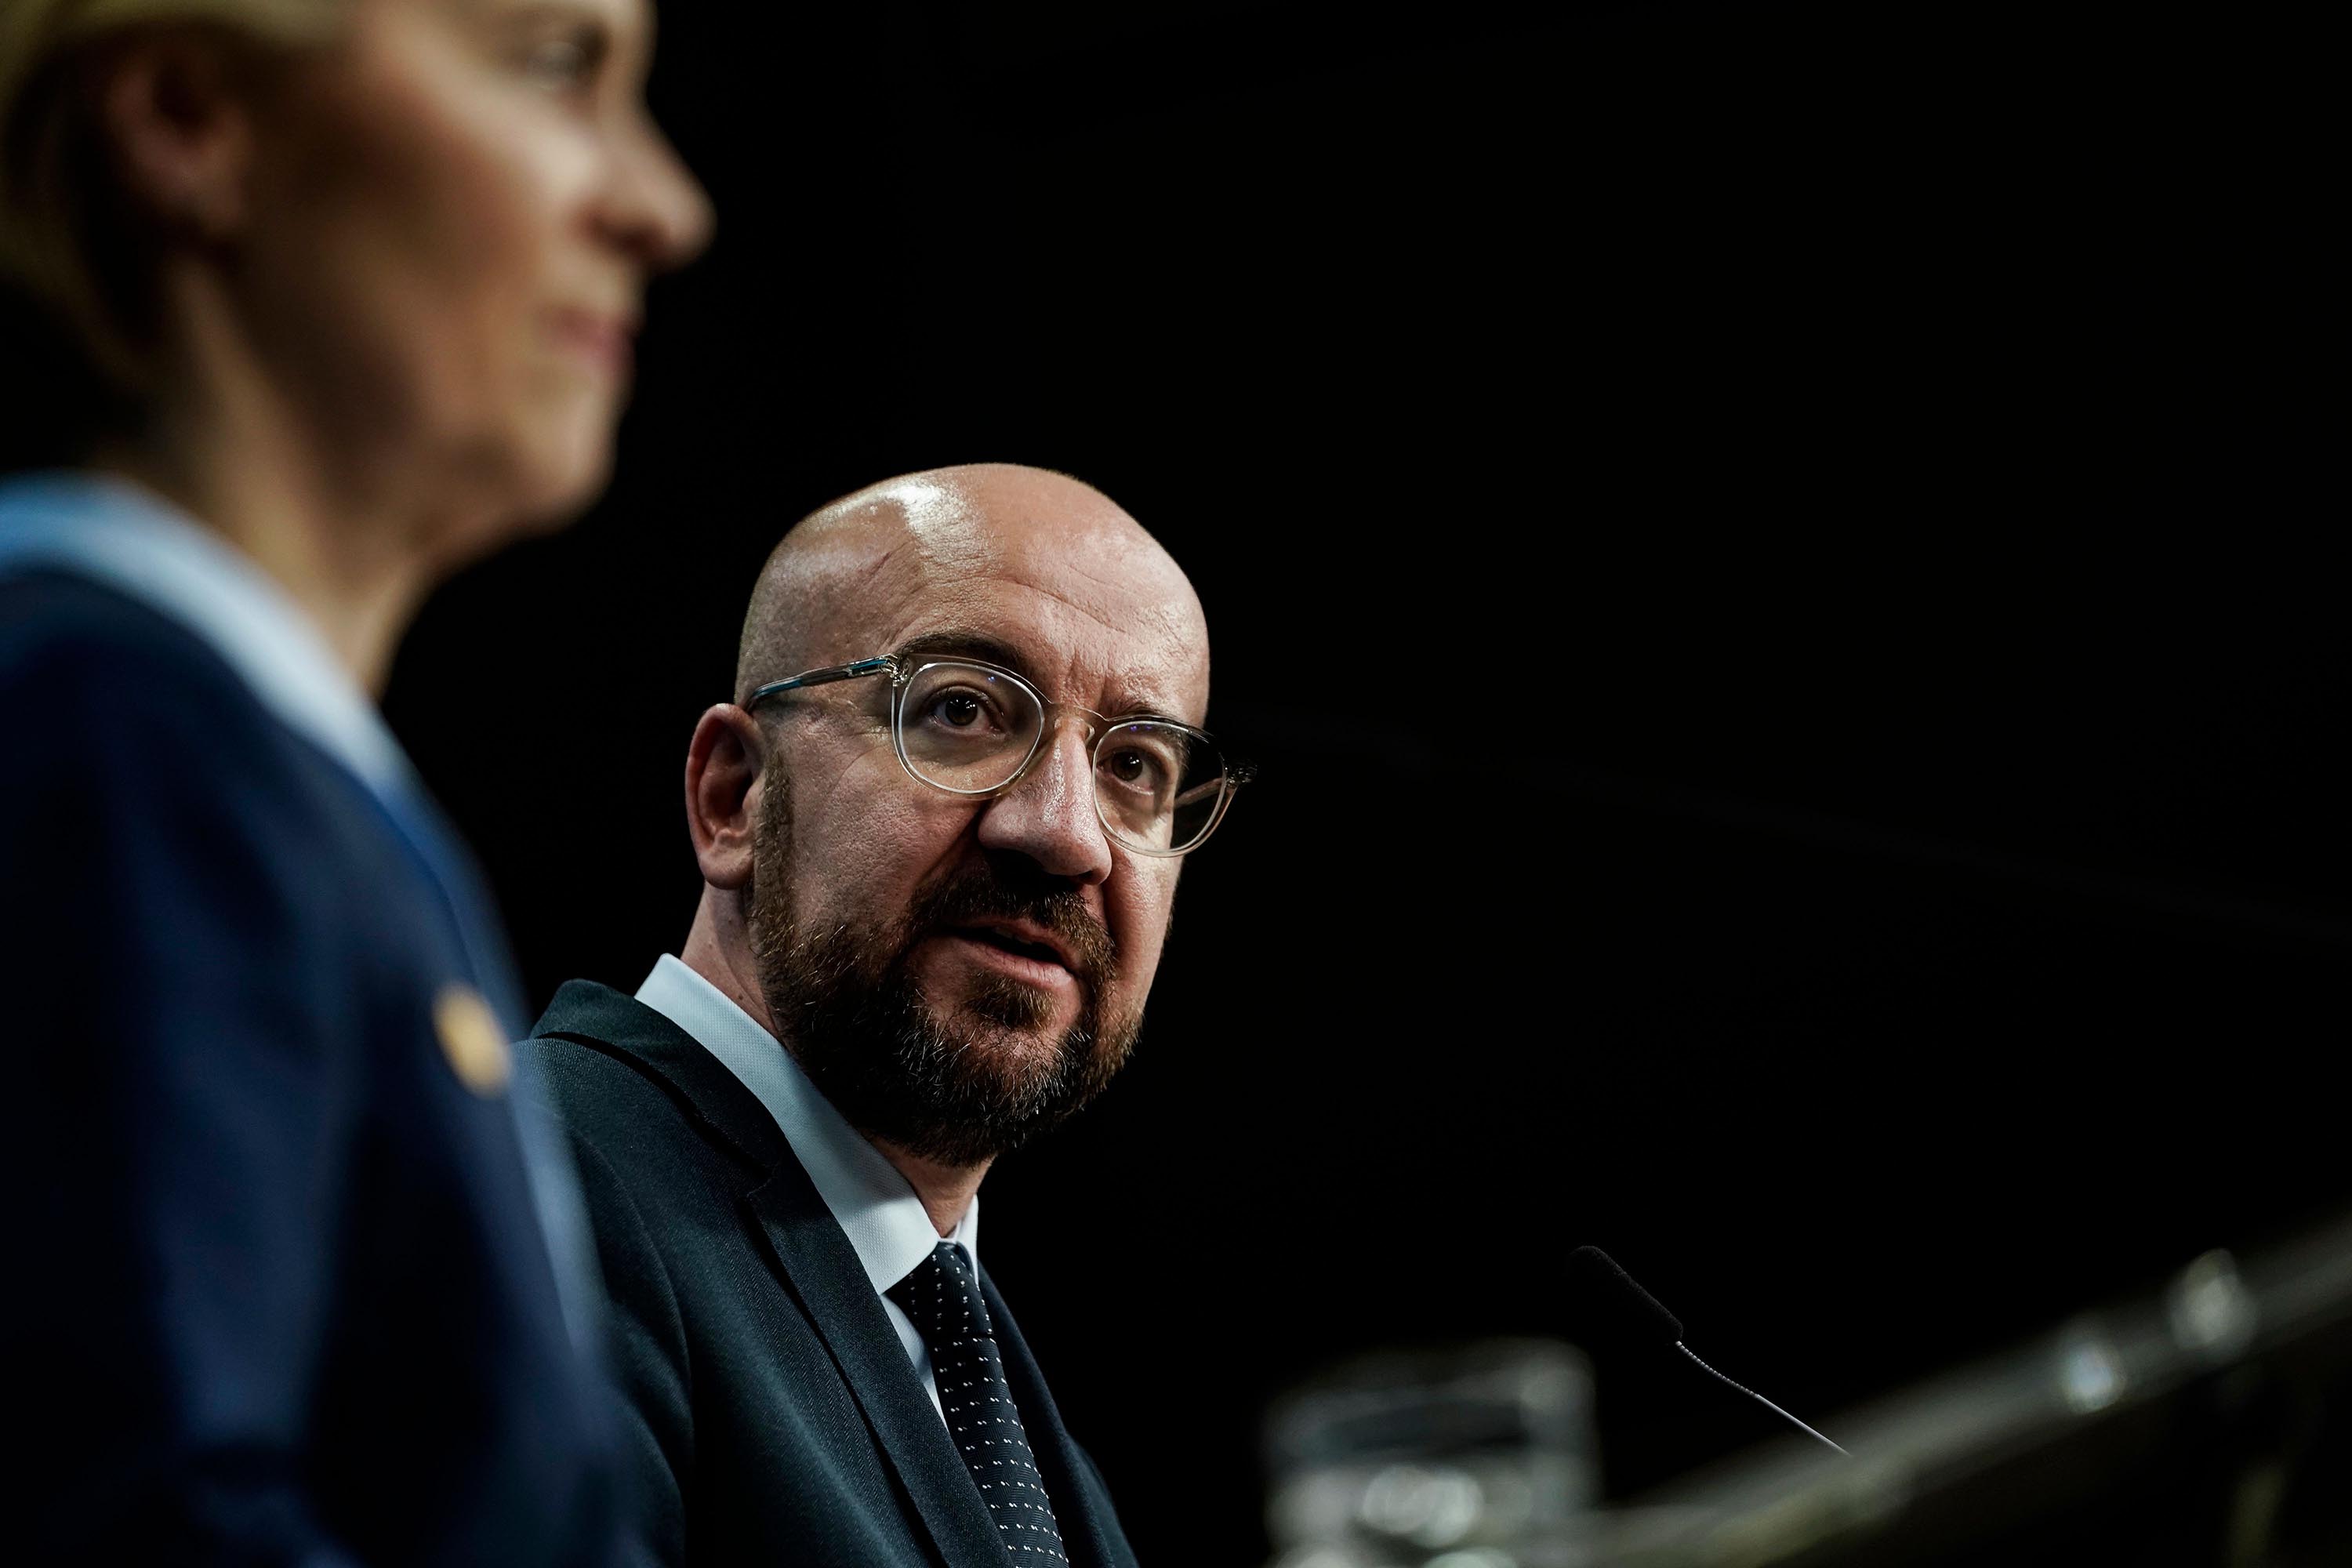 President of the European Council Charles Michel speaks in Brussels early on Friday. Photo: Kenzo Tribouillard/AFP via Getty Images